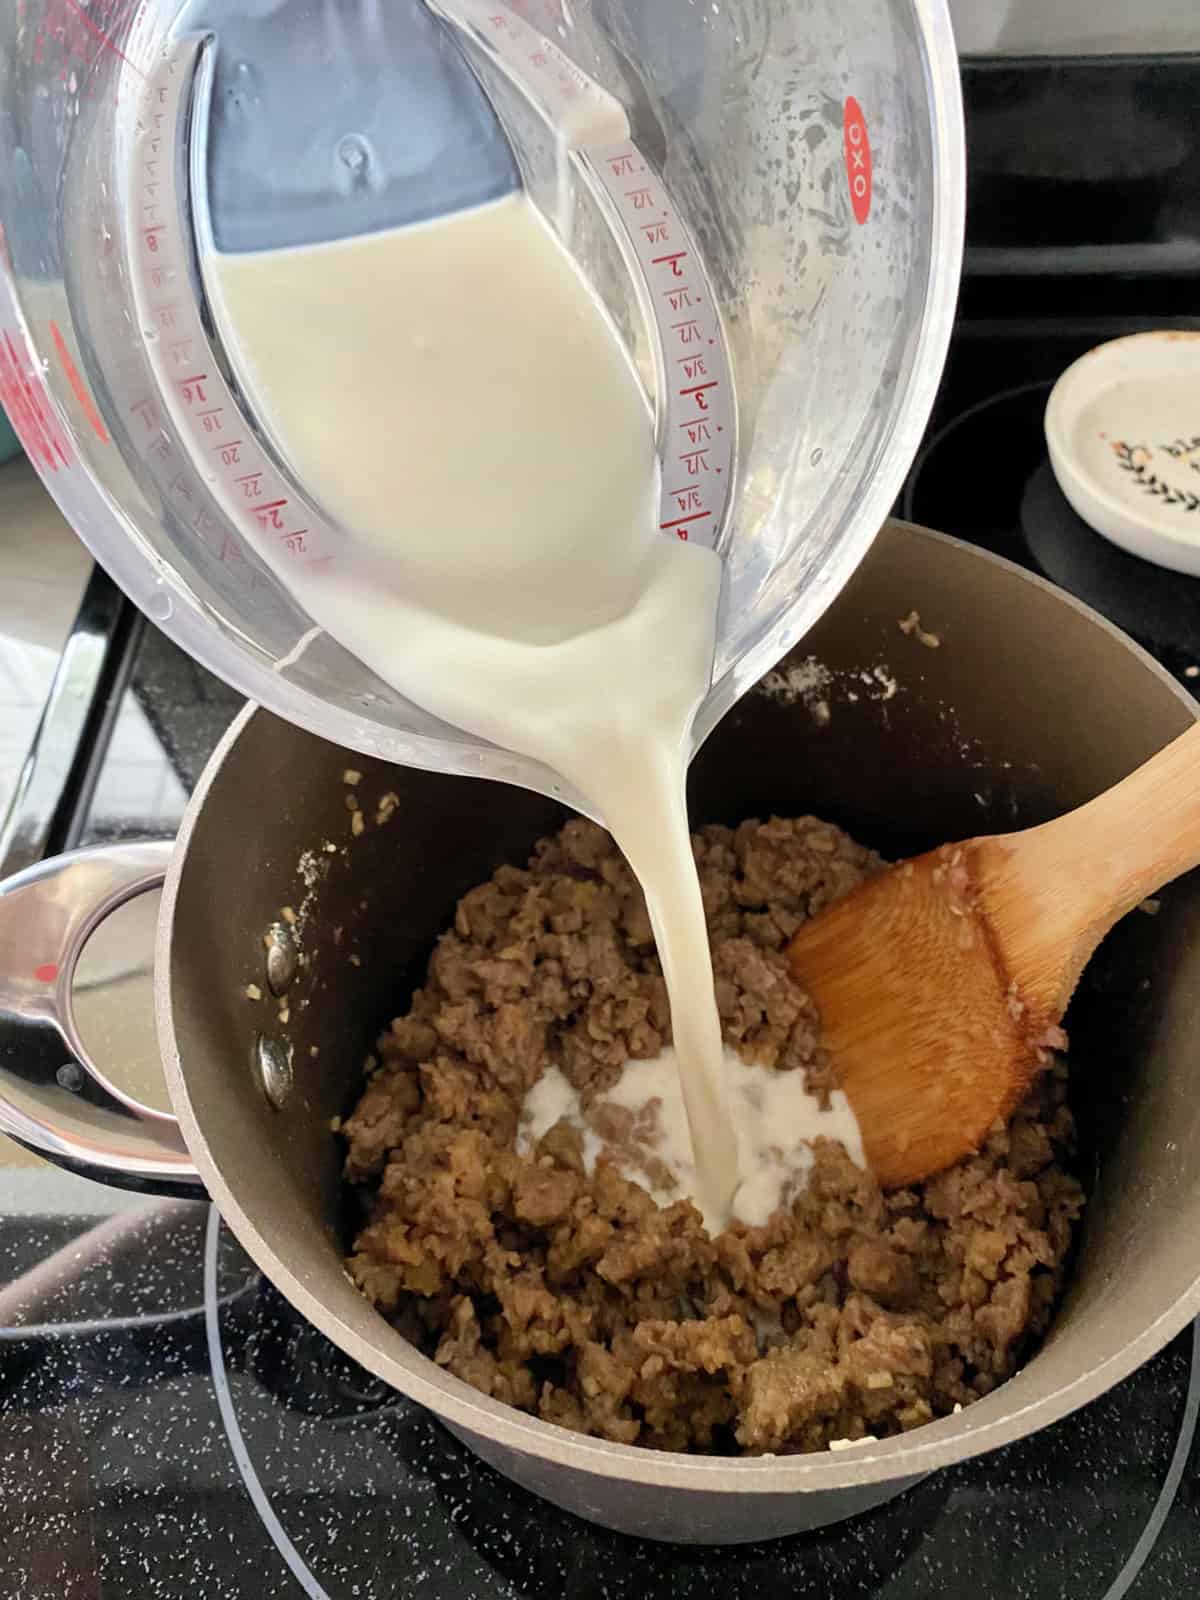 A measuring cup pouring milk into a sauce pan of cooked ground pork.